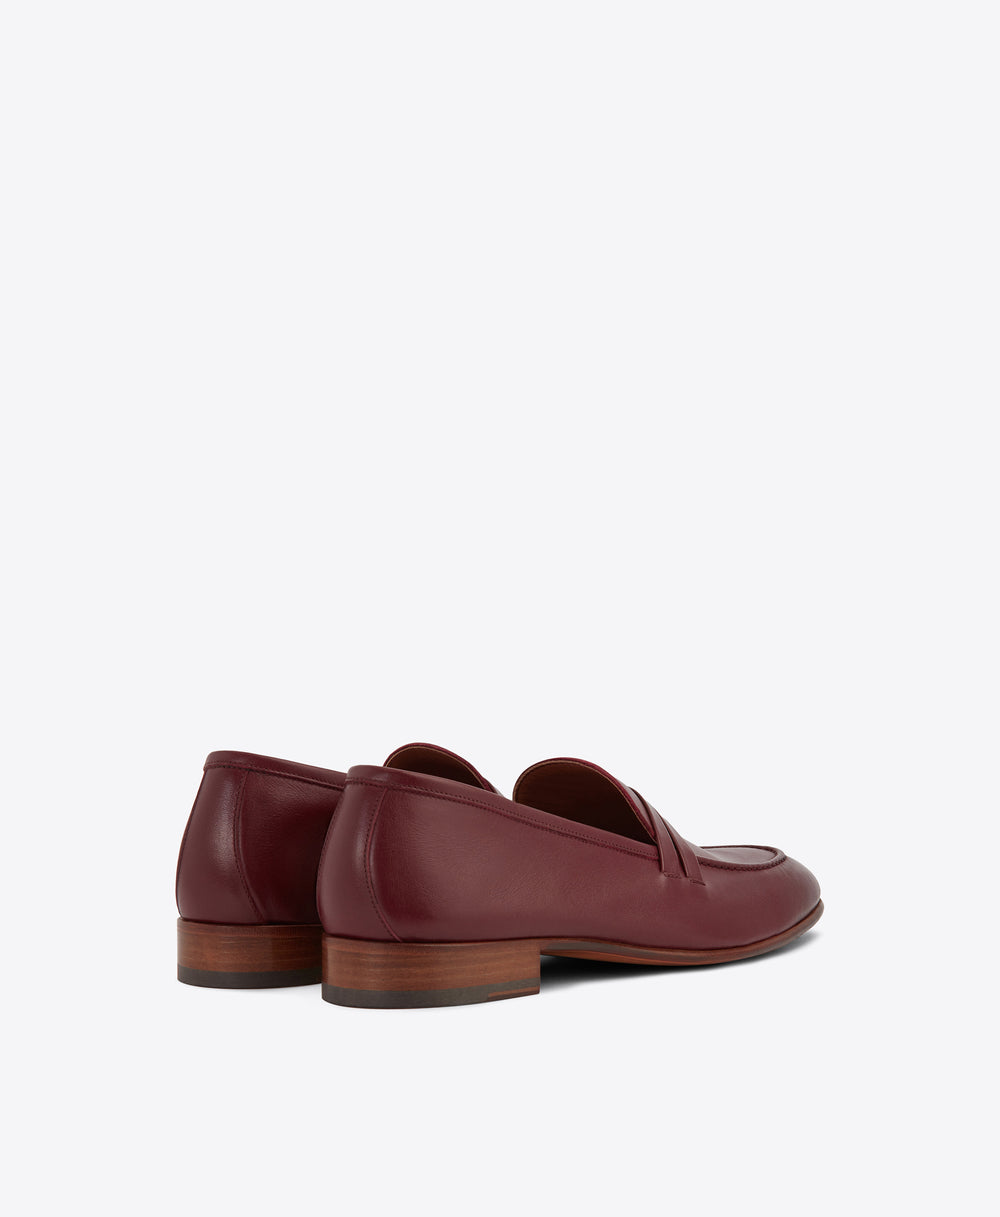 Men's Burgundy Slip On Leather Loafer Malone Souliers